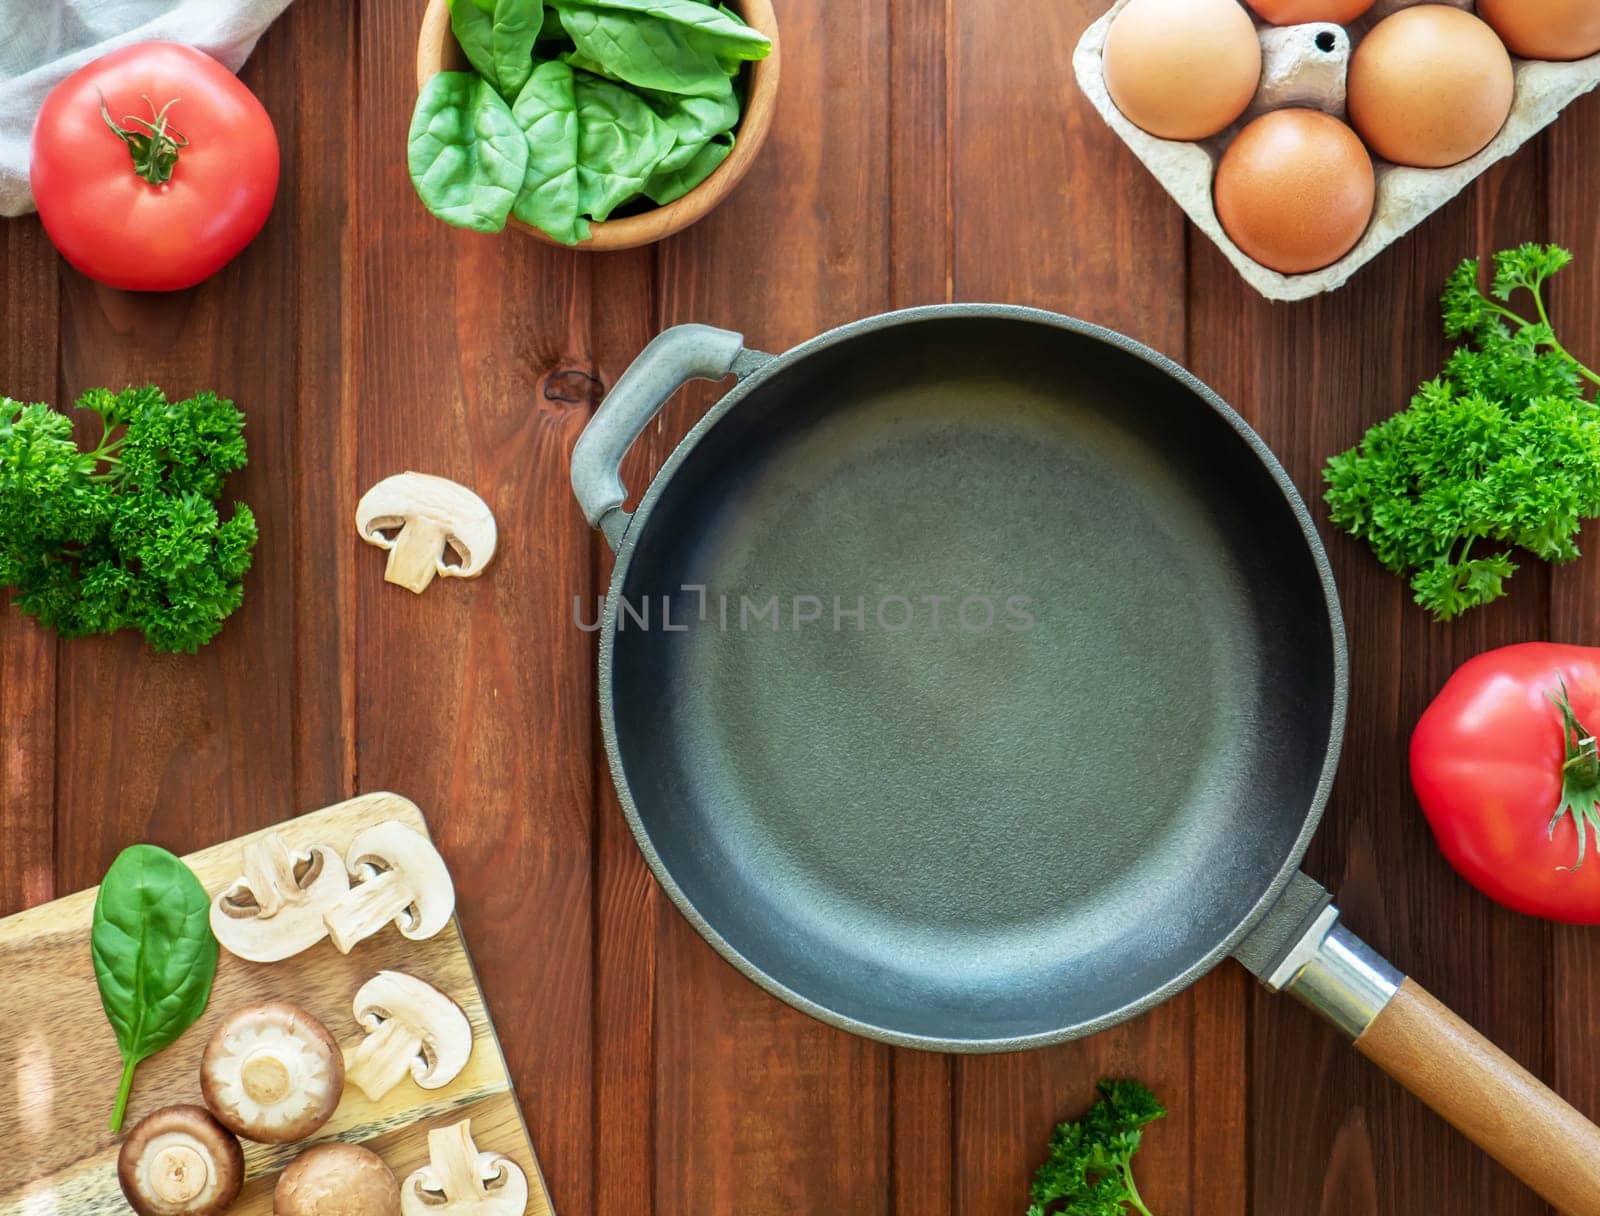 Idea for breakfast. Empty cast-iron frying pan and ingredients for omlette or scrambled eggs. Eggs, mushrooms, tomato, spinach and parsley on wooden table. Healthy homemade dish for low carb. Top view